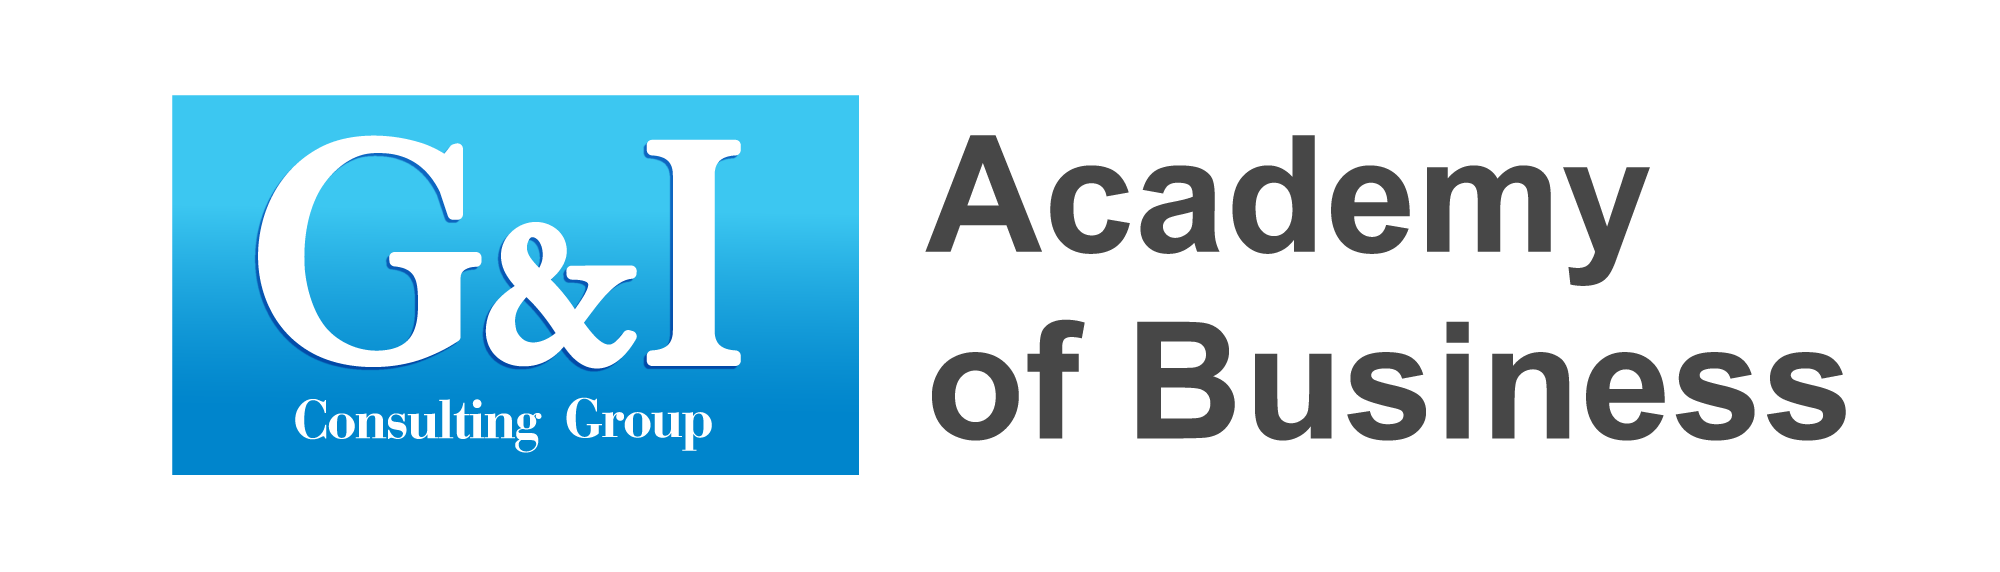 G&I Academy of Business